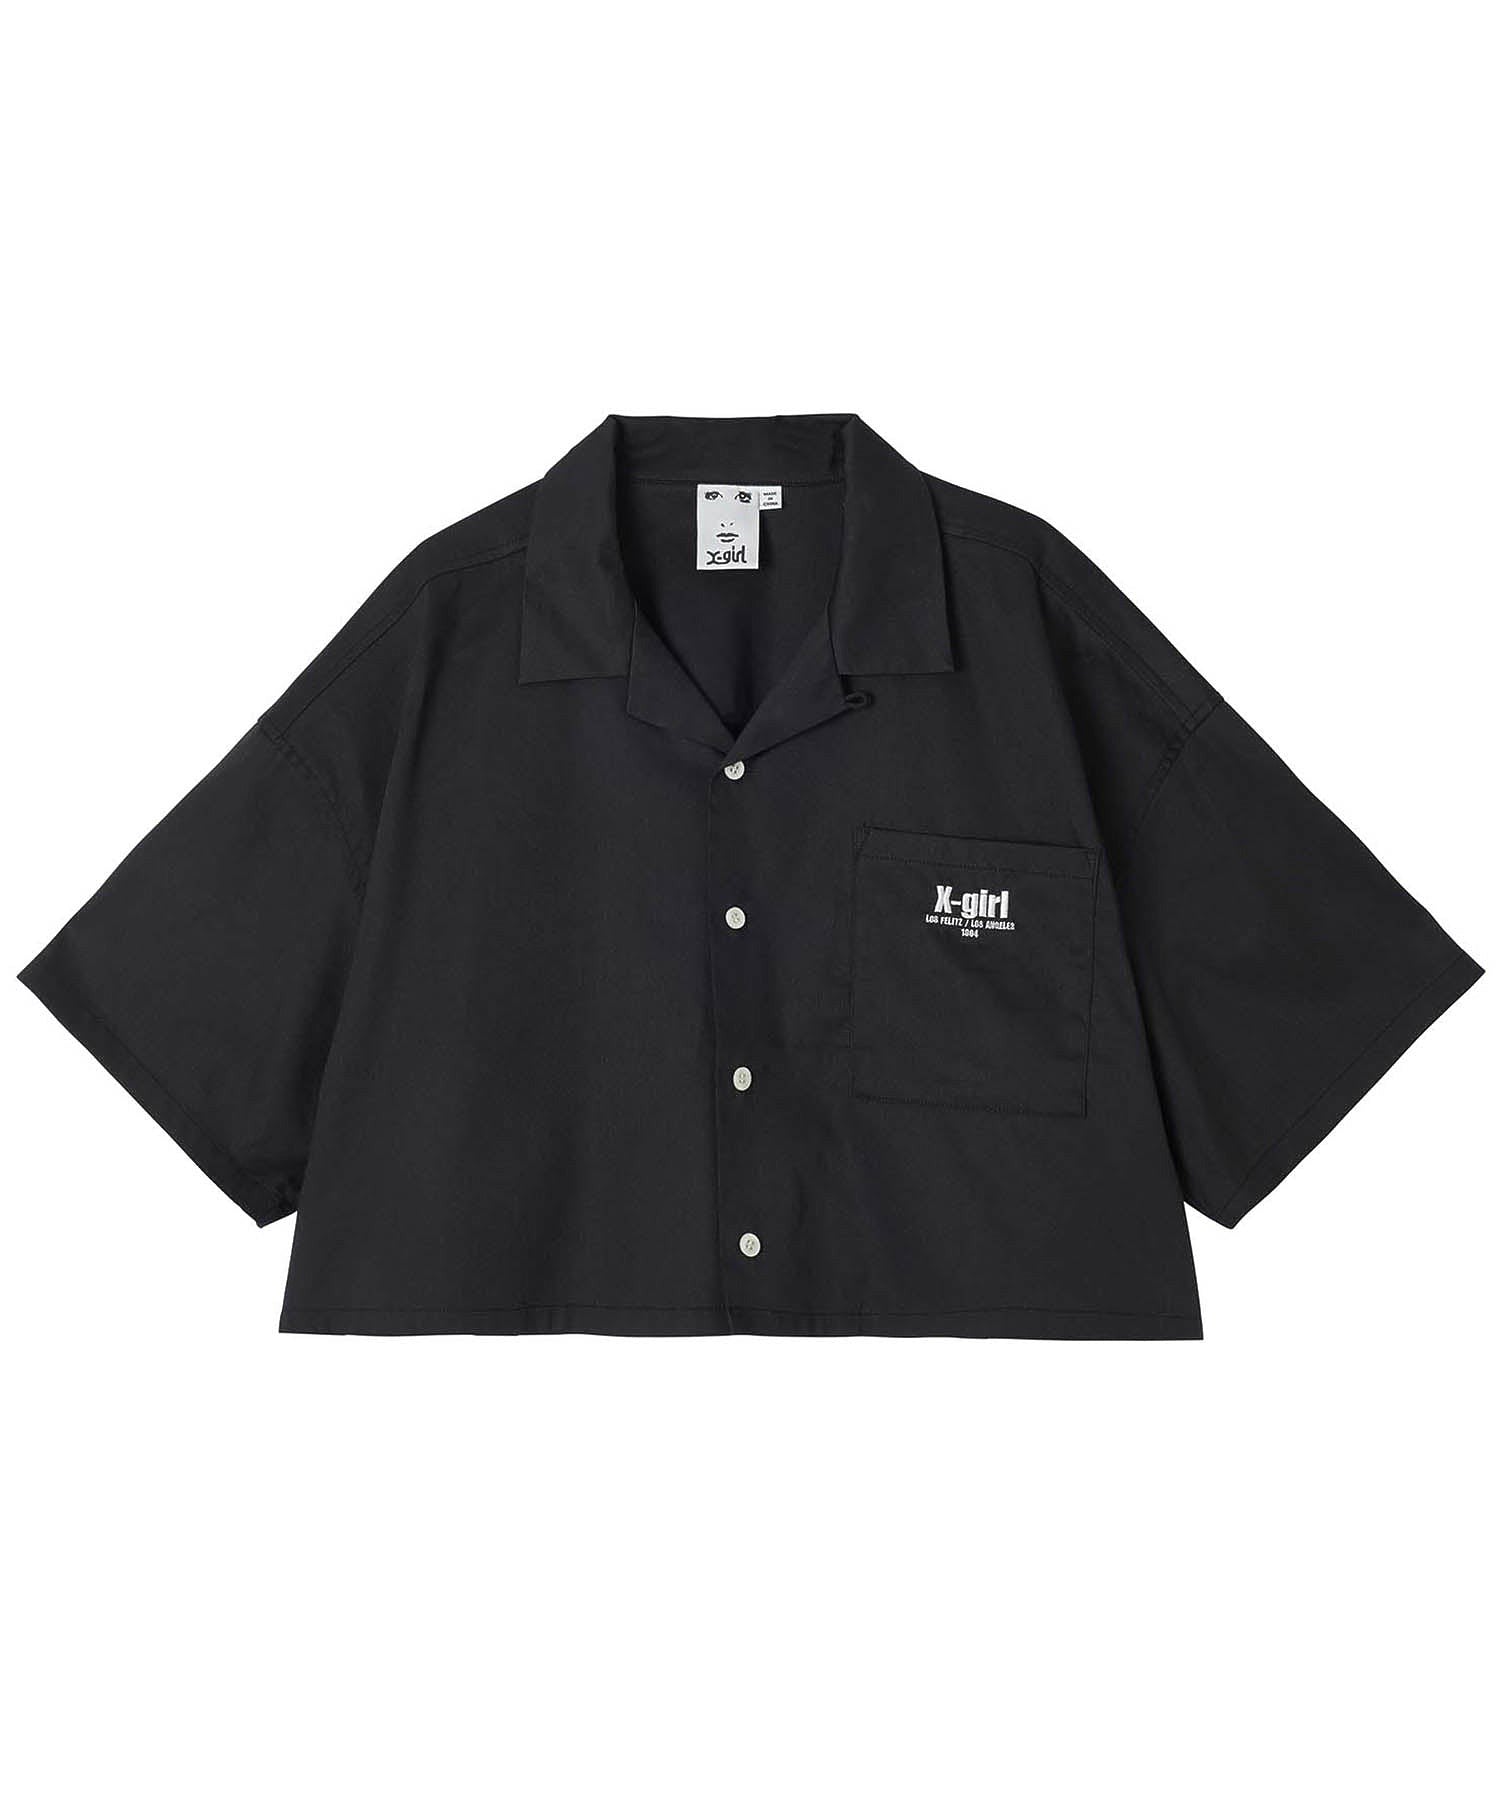 ANONYMITY OPEN COLLAR CROPPED SHIRT X-girl